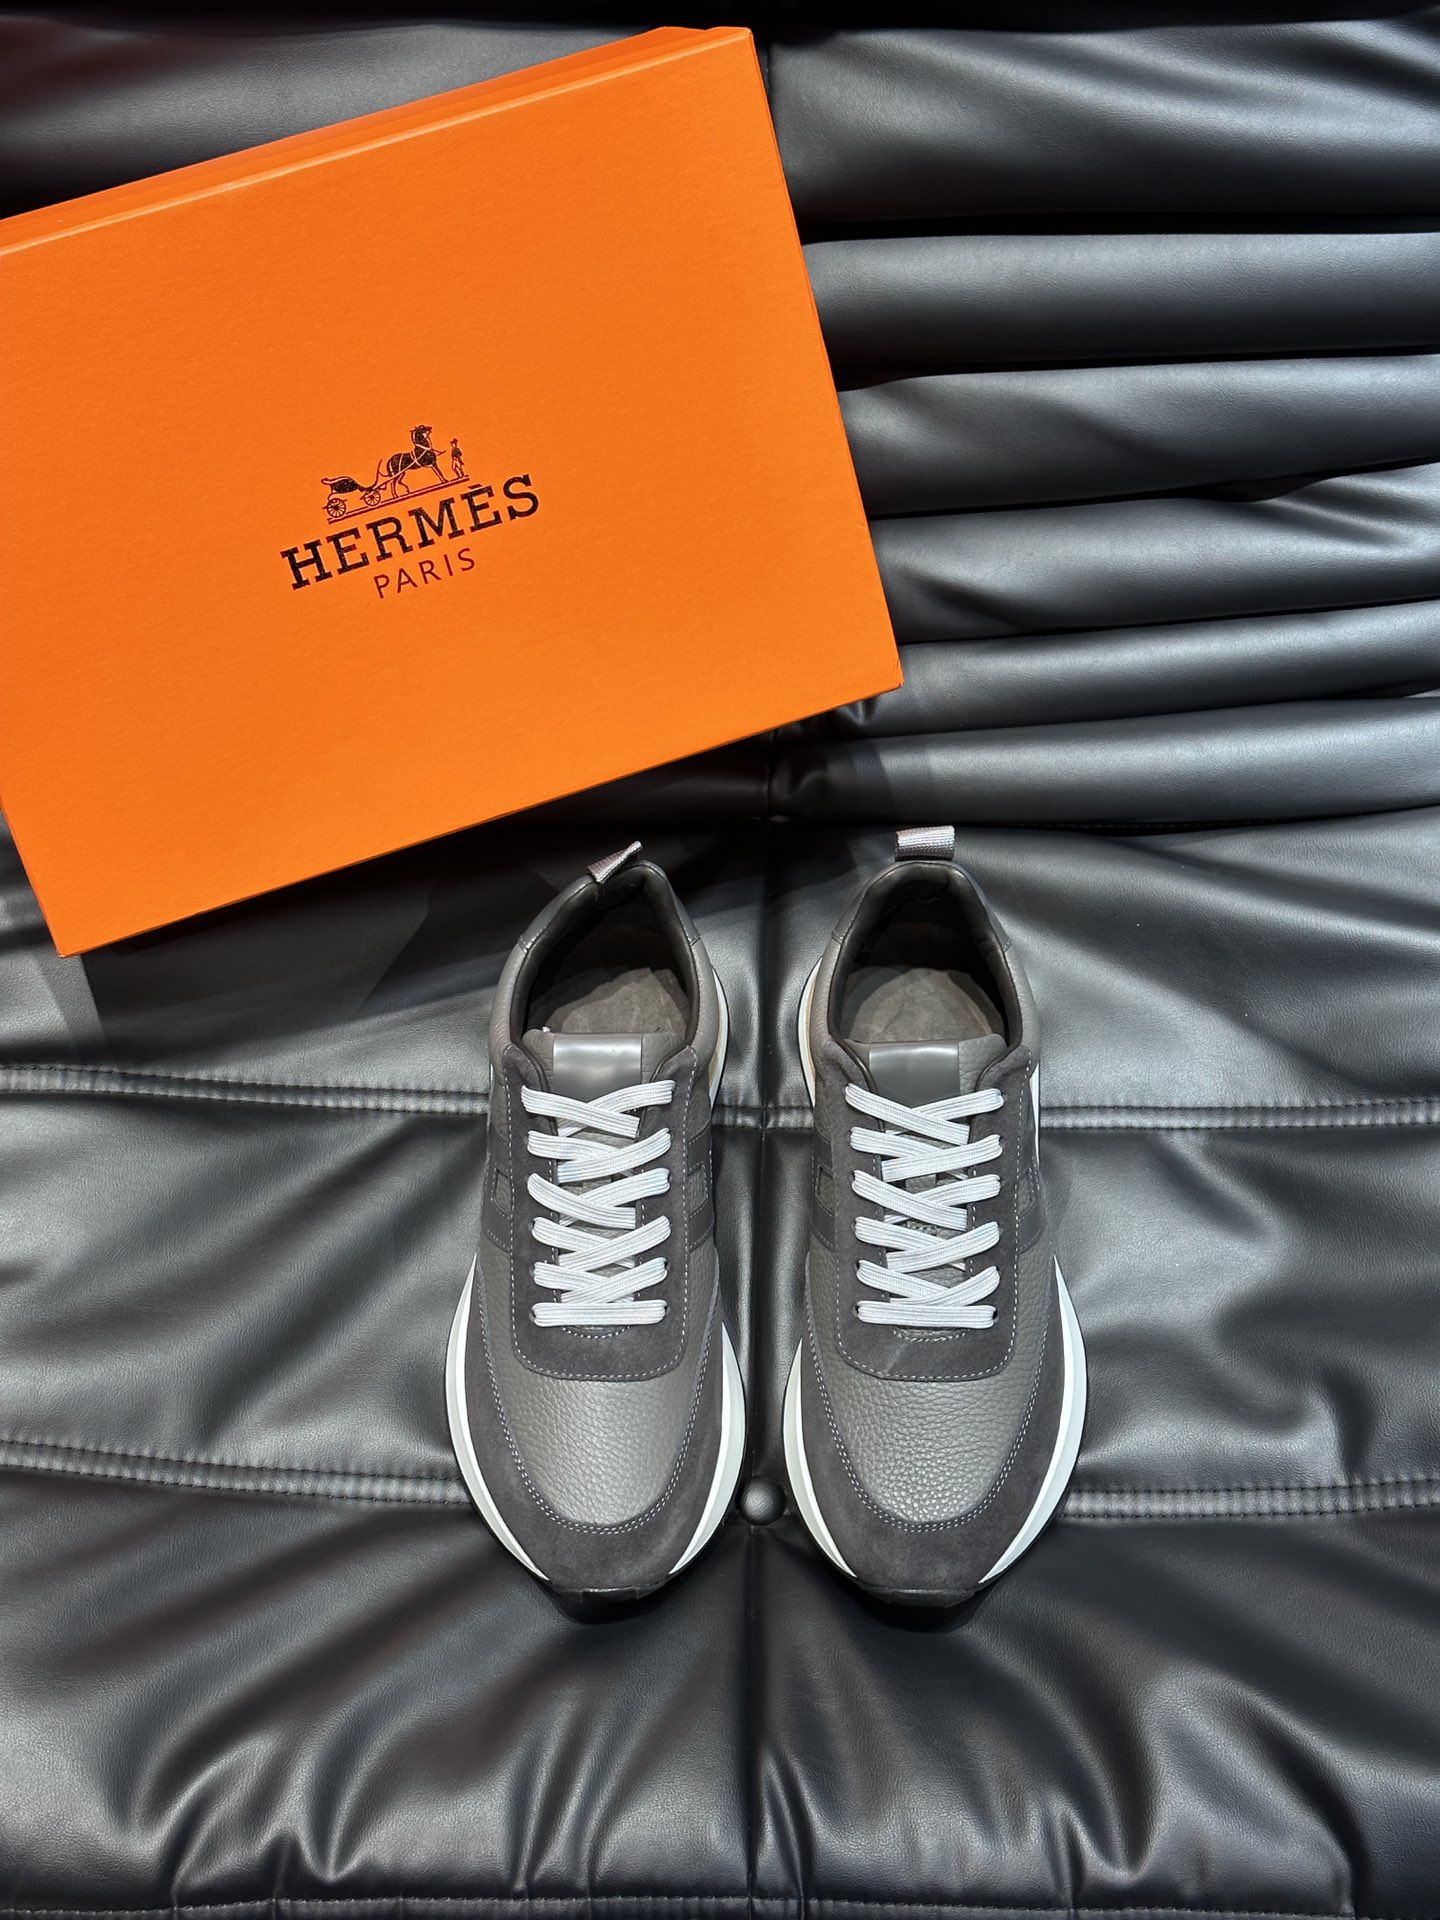 Hermes Shoes Sneakers Black Calfskin Cowhide Rubber Fashion Casual